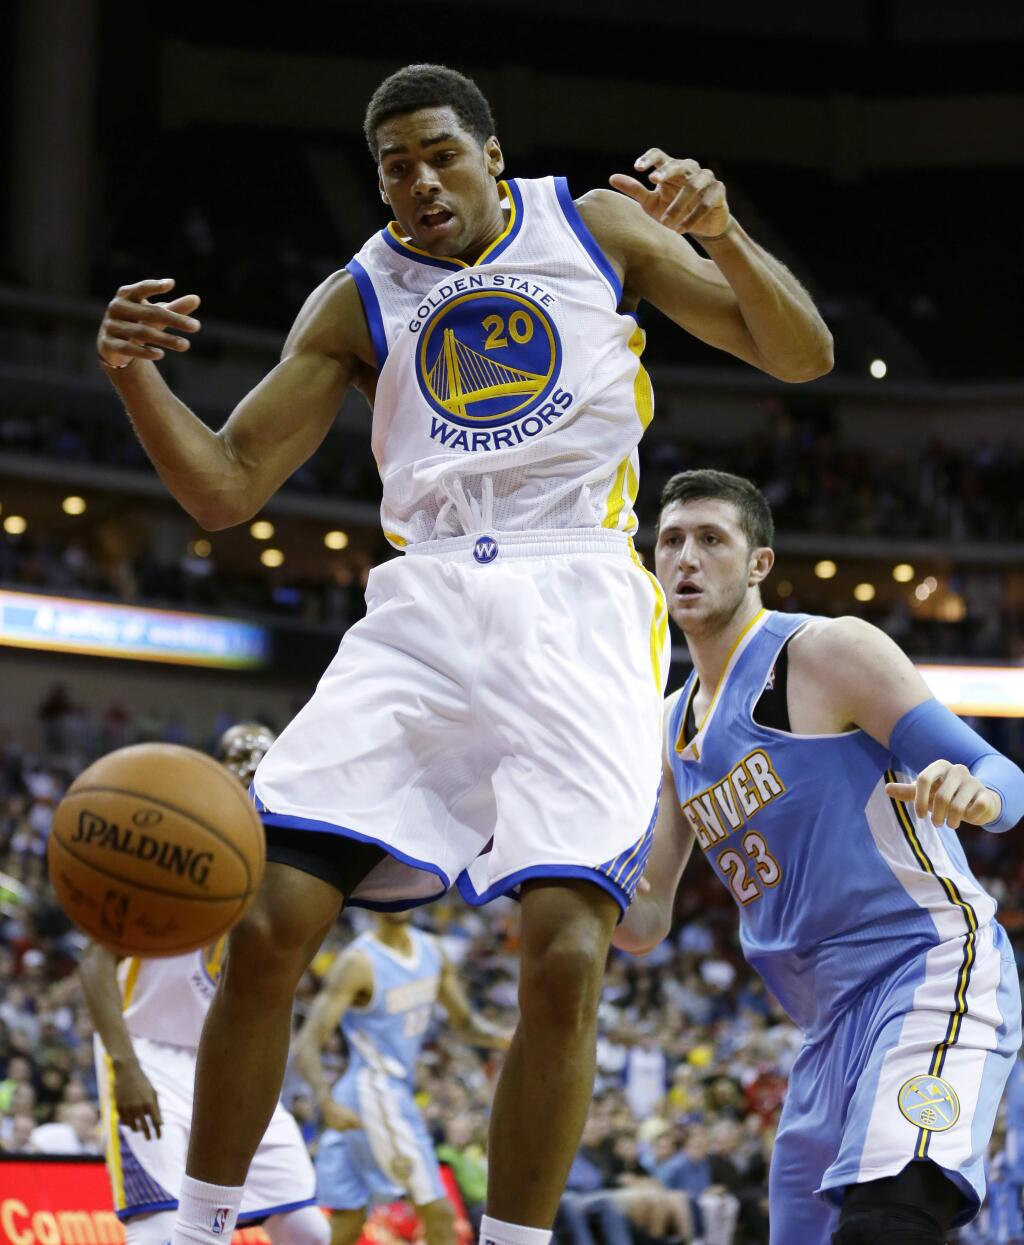 Golden State Warriors forward James Michael McAdoo, left, loses the ball in front of Denver Nuggets center Jusuf Nurkic during the second half of a preseason NBA basketball game, Thursday, Oct. 16, 2014, in Des Moines, Iowa. Golden State won 104-101. (AP Photo/Charlie Neibergall)